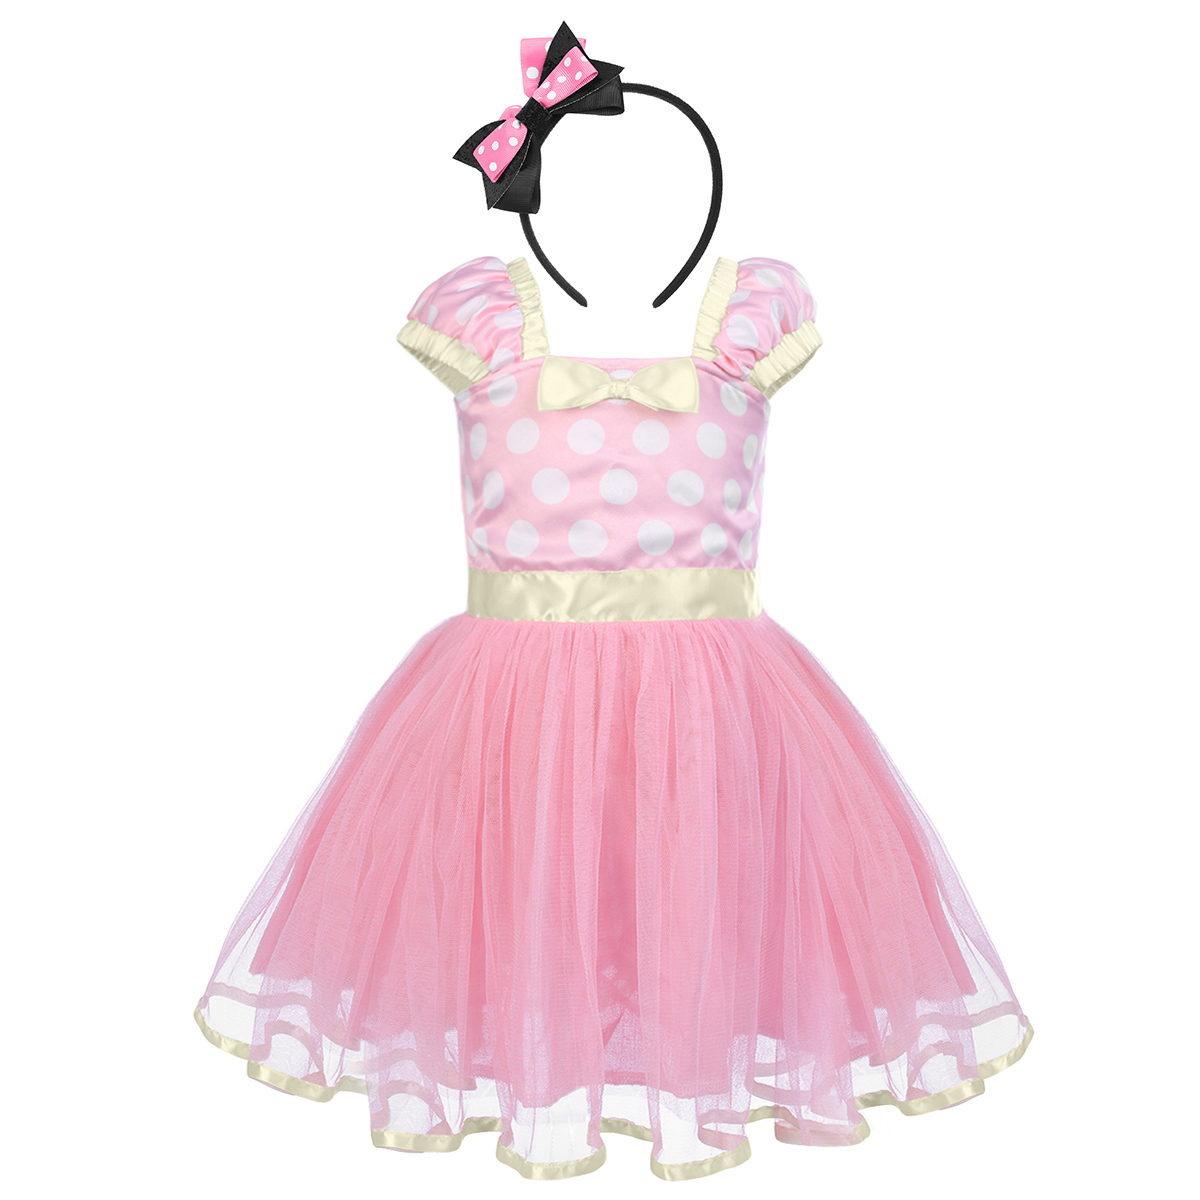 IBTOM CASTLE Toddler Girls Polka Dots Princess Party Cosplay Pageant Fancy Dress up Birthday Tutu Dress + Ears Headband Outfit Set 18-24 Months Pink - image 1 of 8